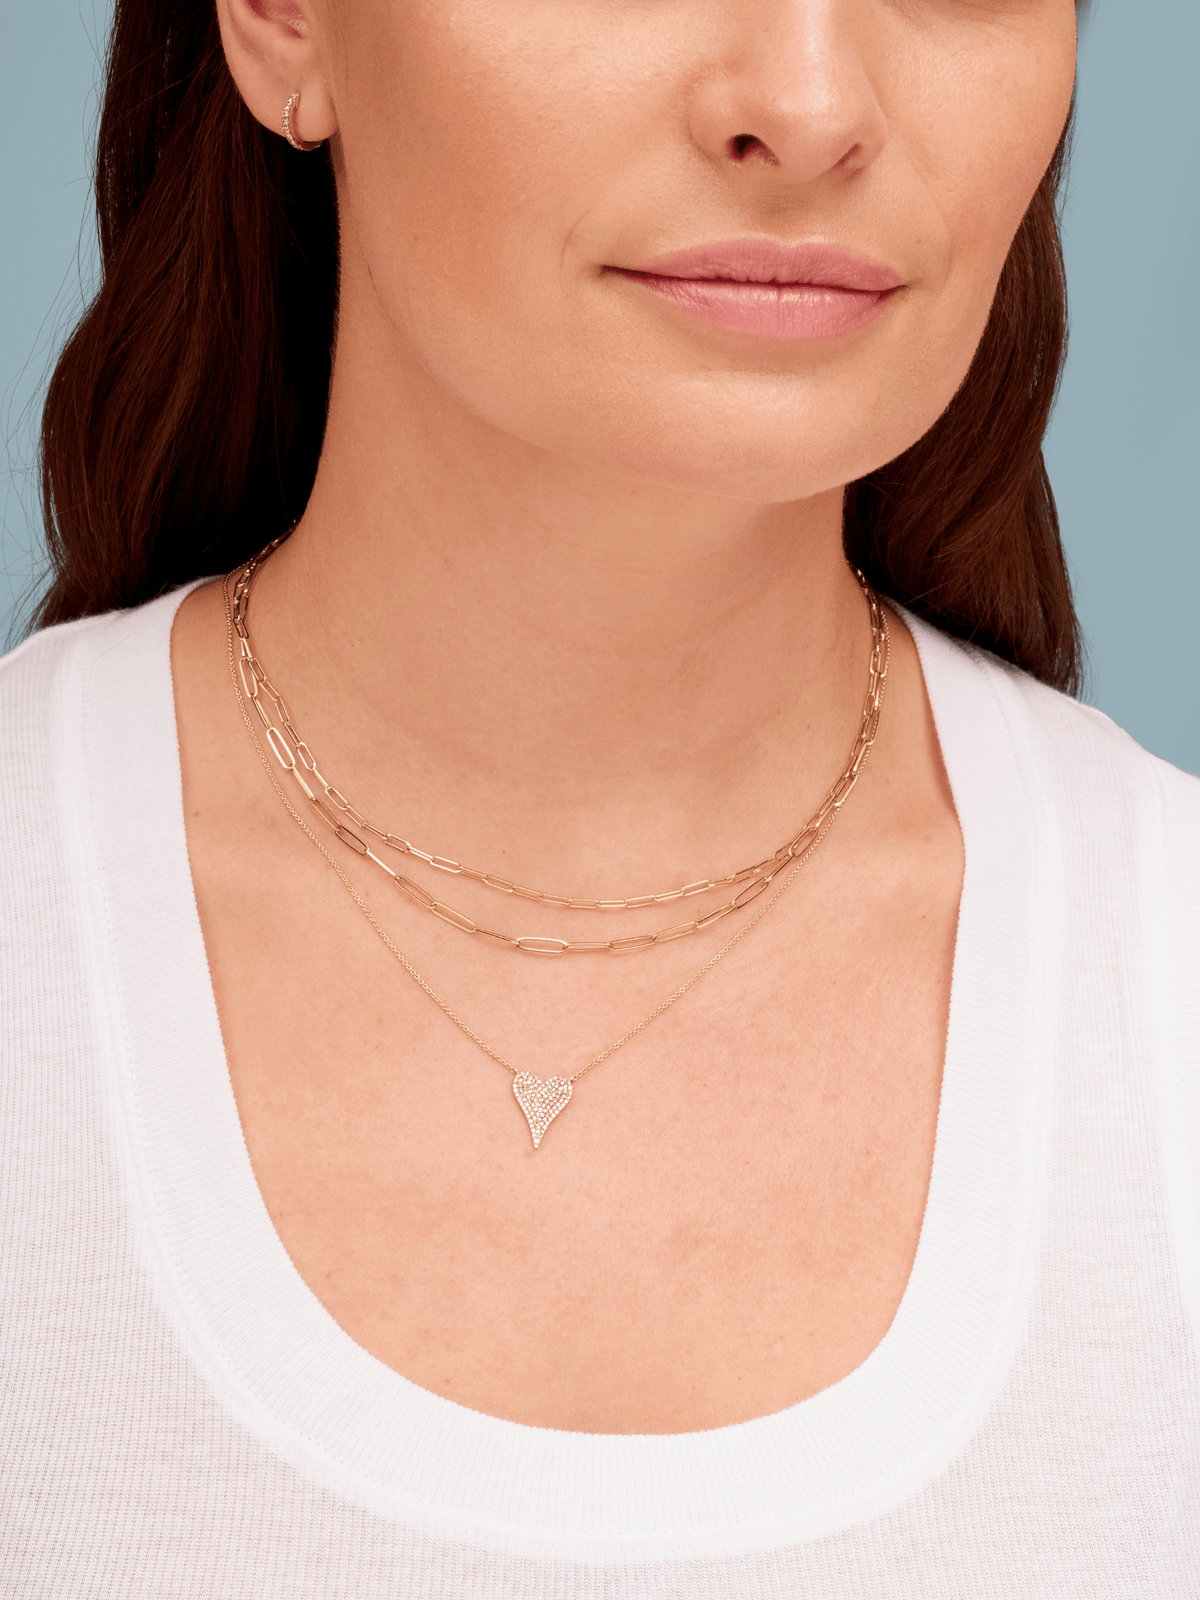 14K gold paperclip chain necklaces layered with diamond heart necklace